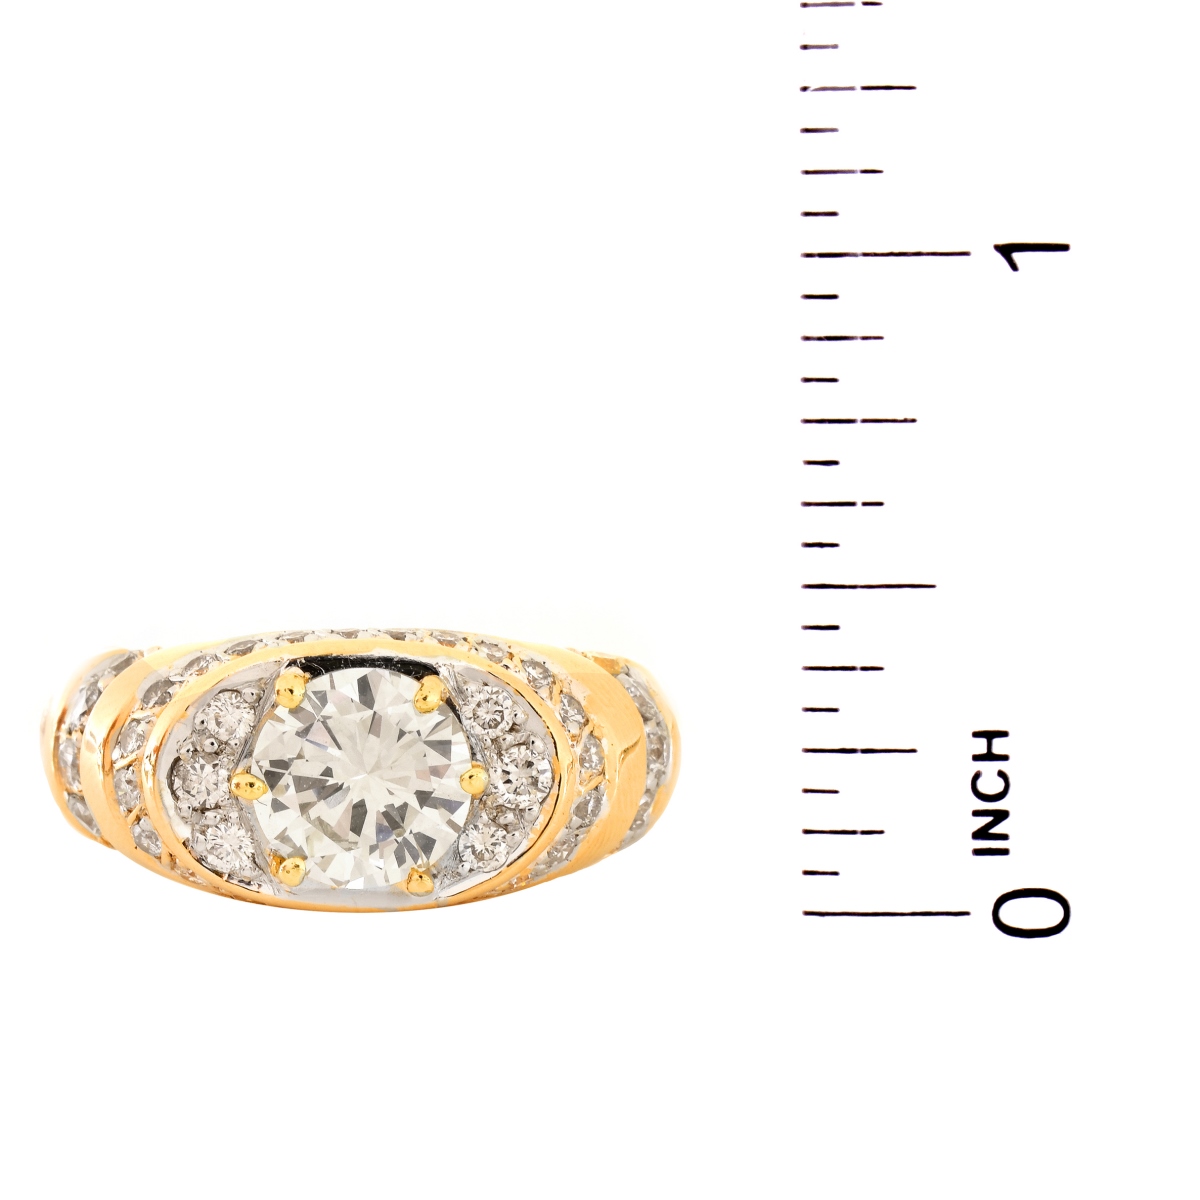 Man's 4.0ct TW Diamond and 14K Gold Ring